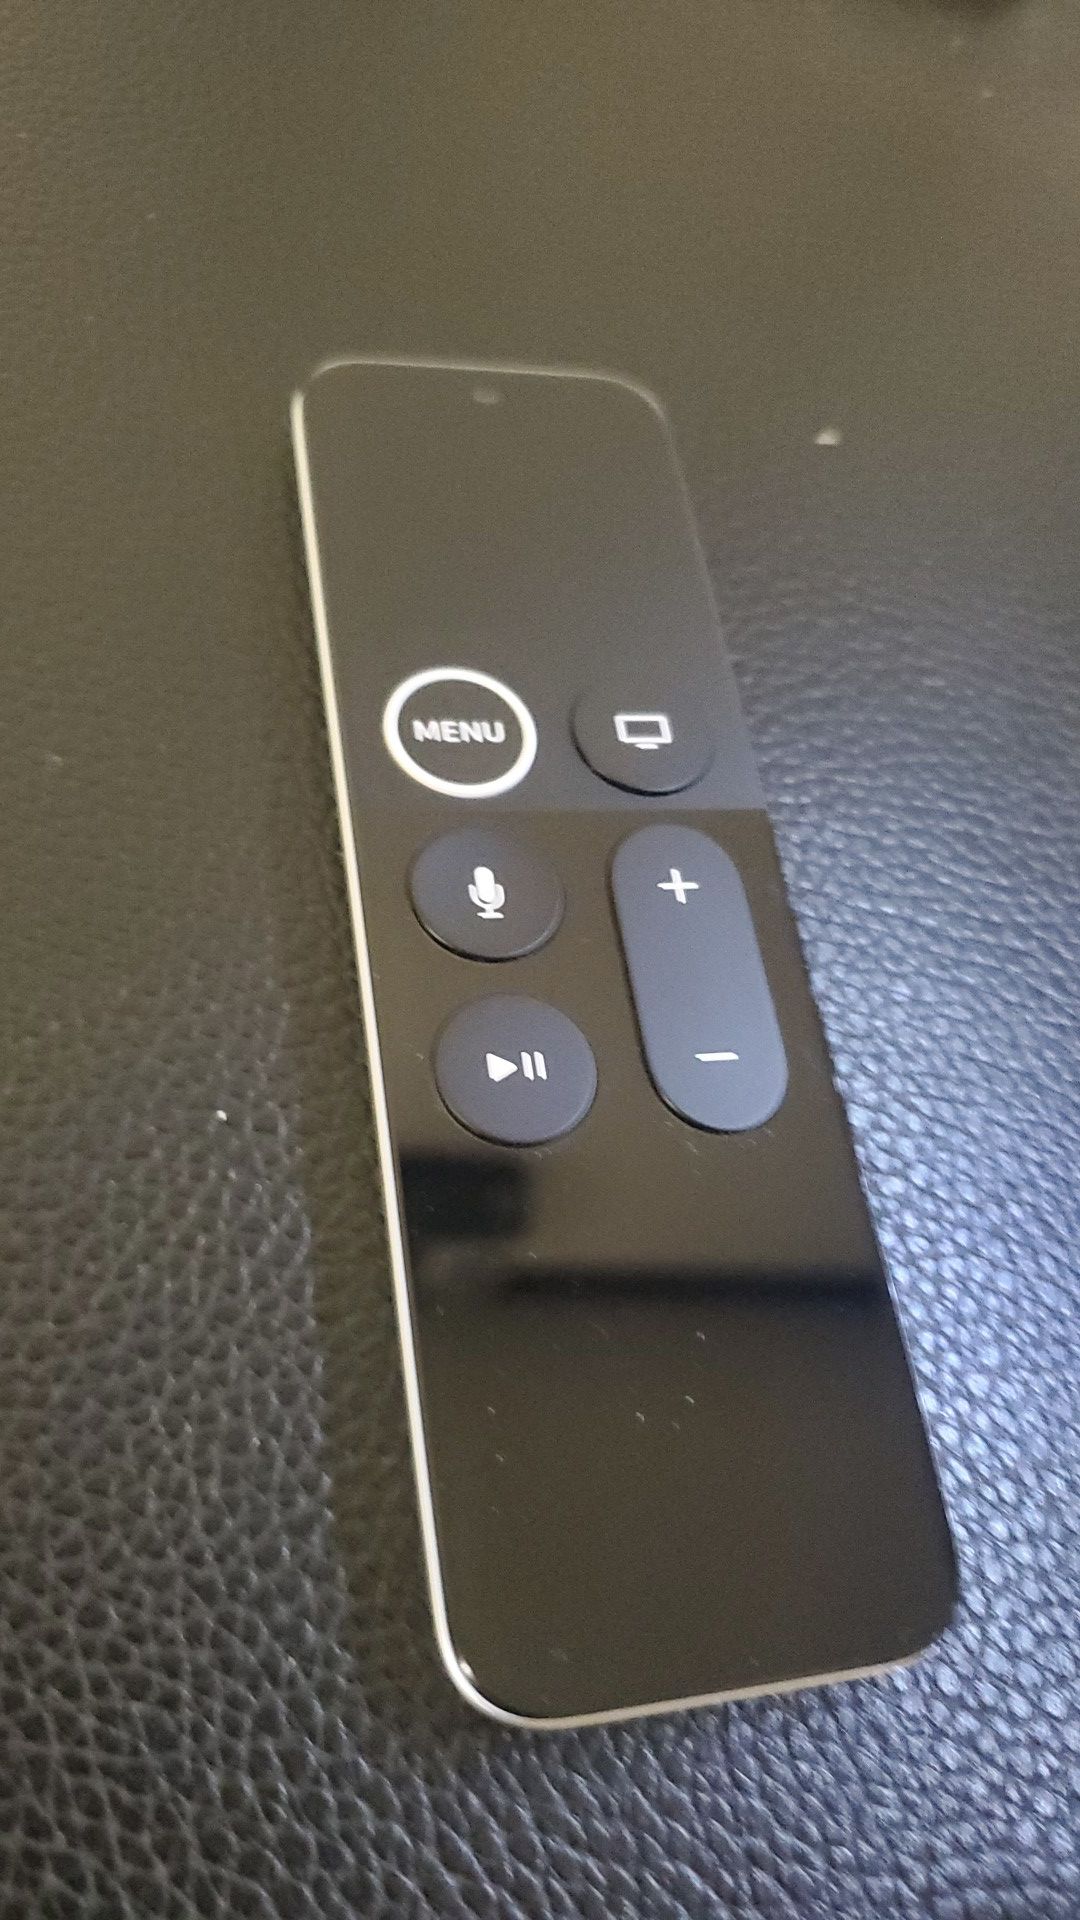 4K Apple TV voice remote (remote only)